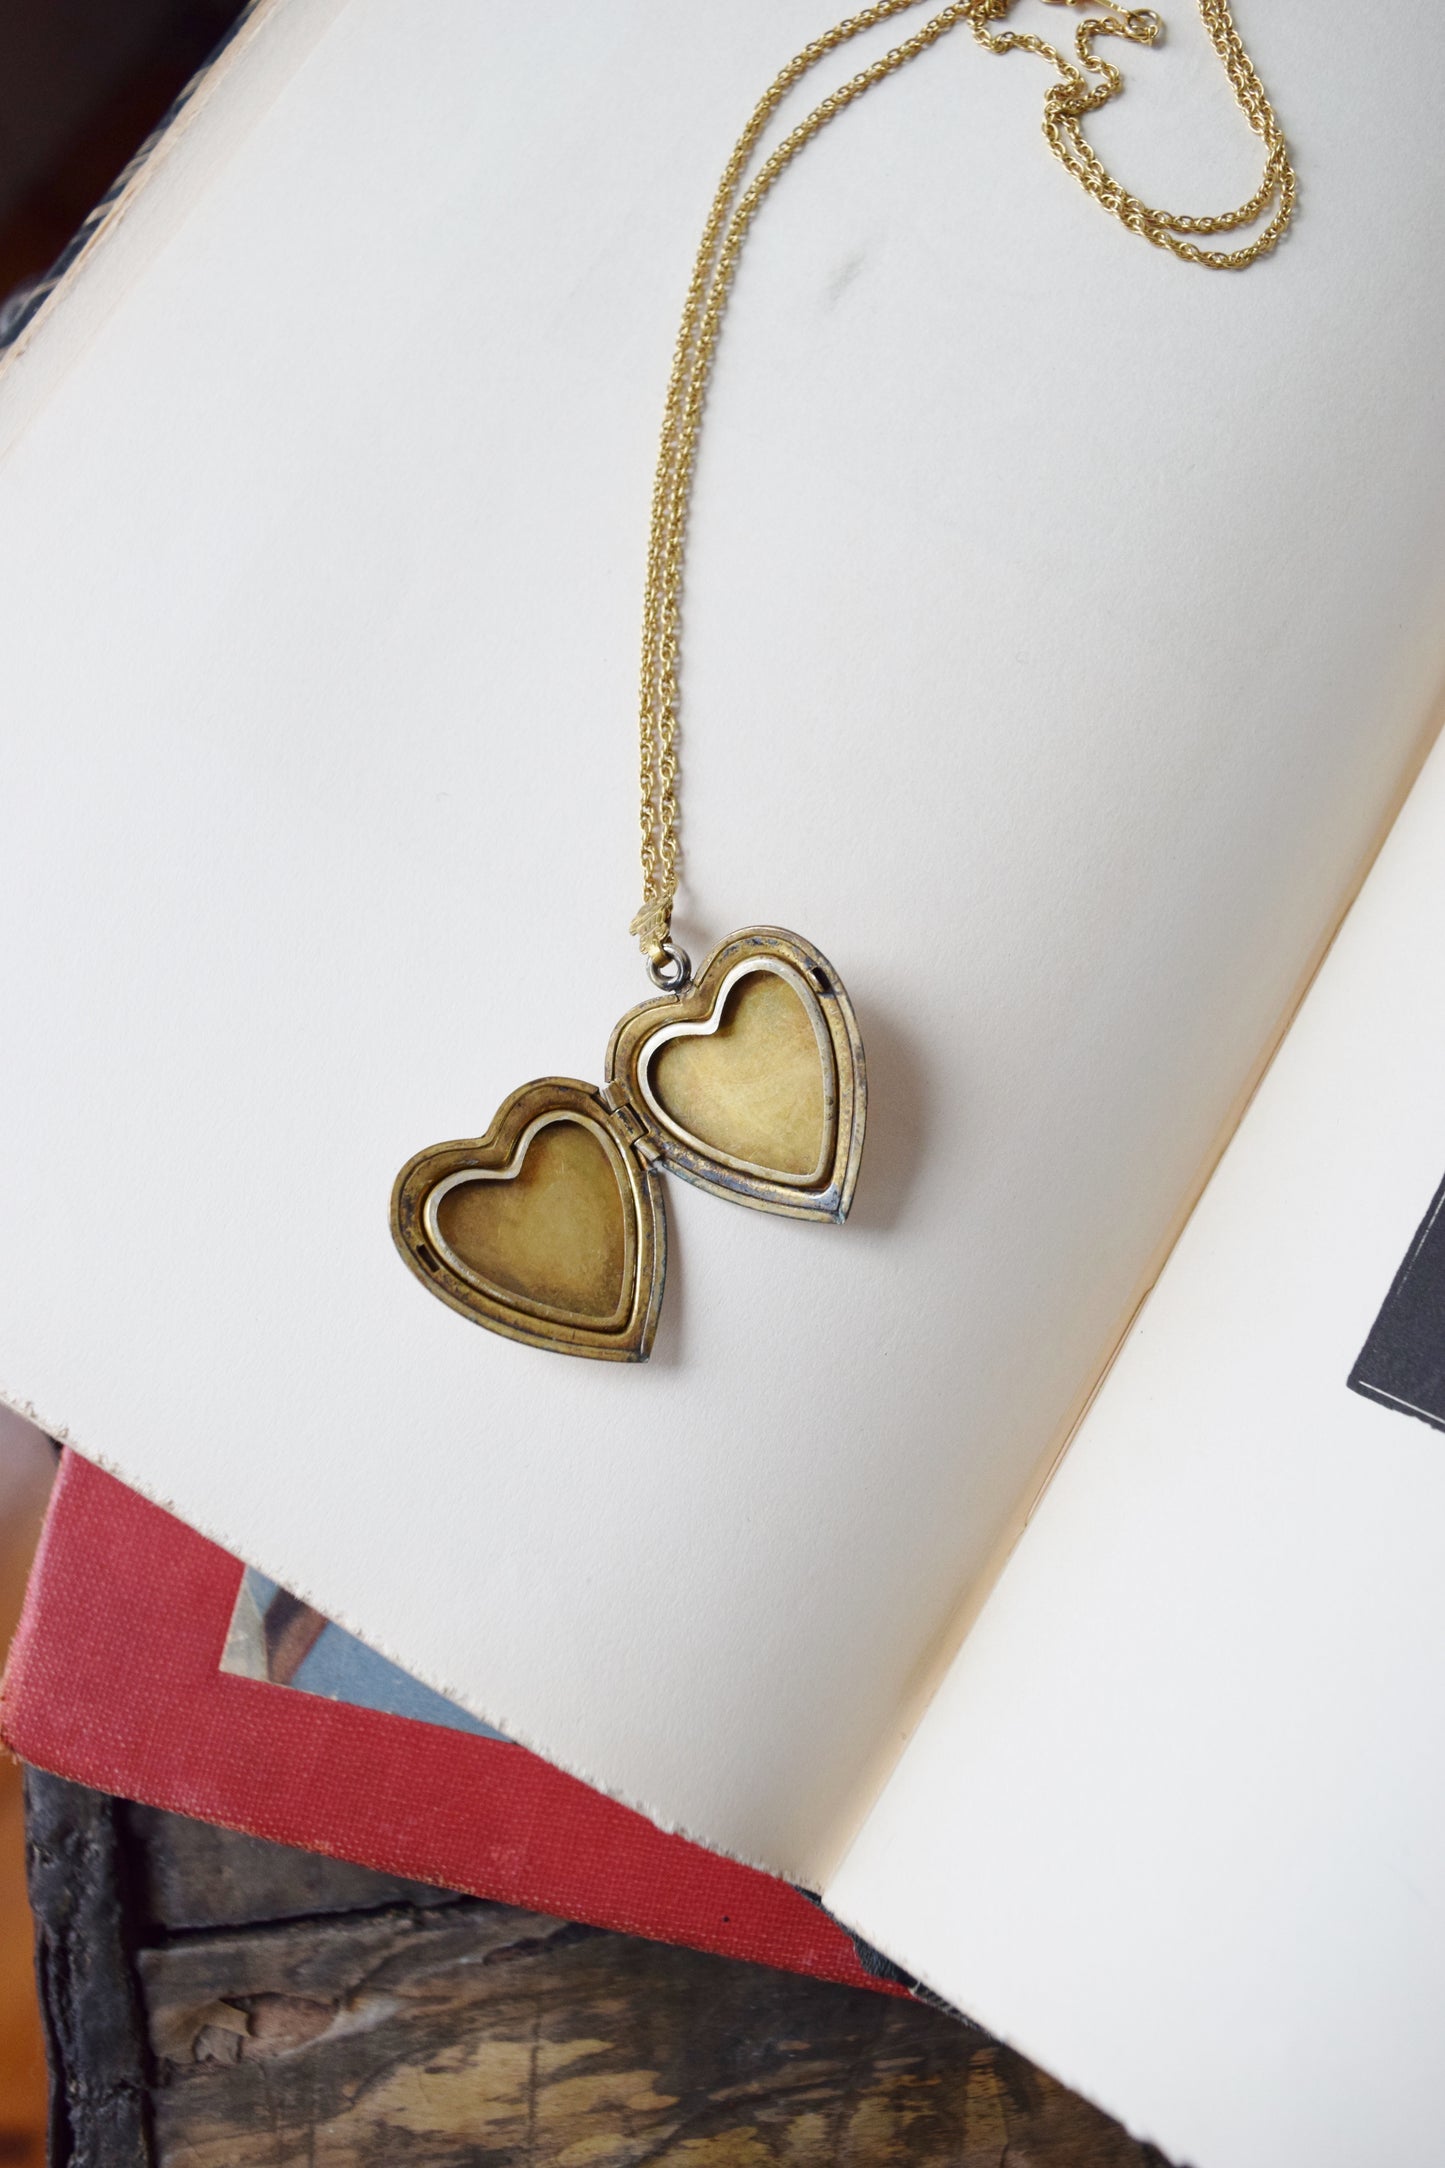 Antique Gold Heart Shaped Locket Necklace